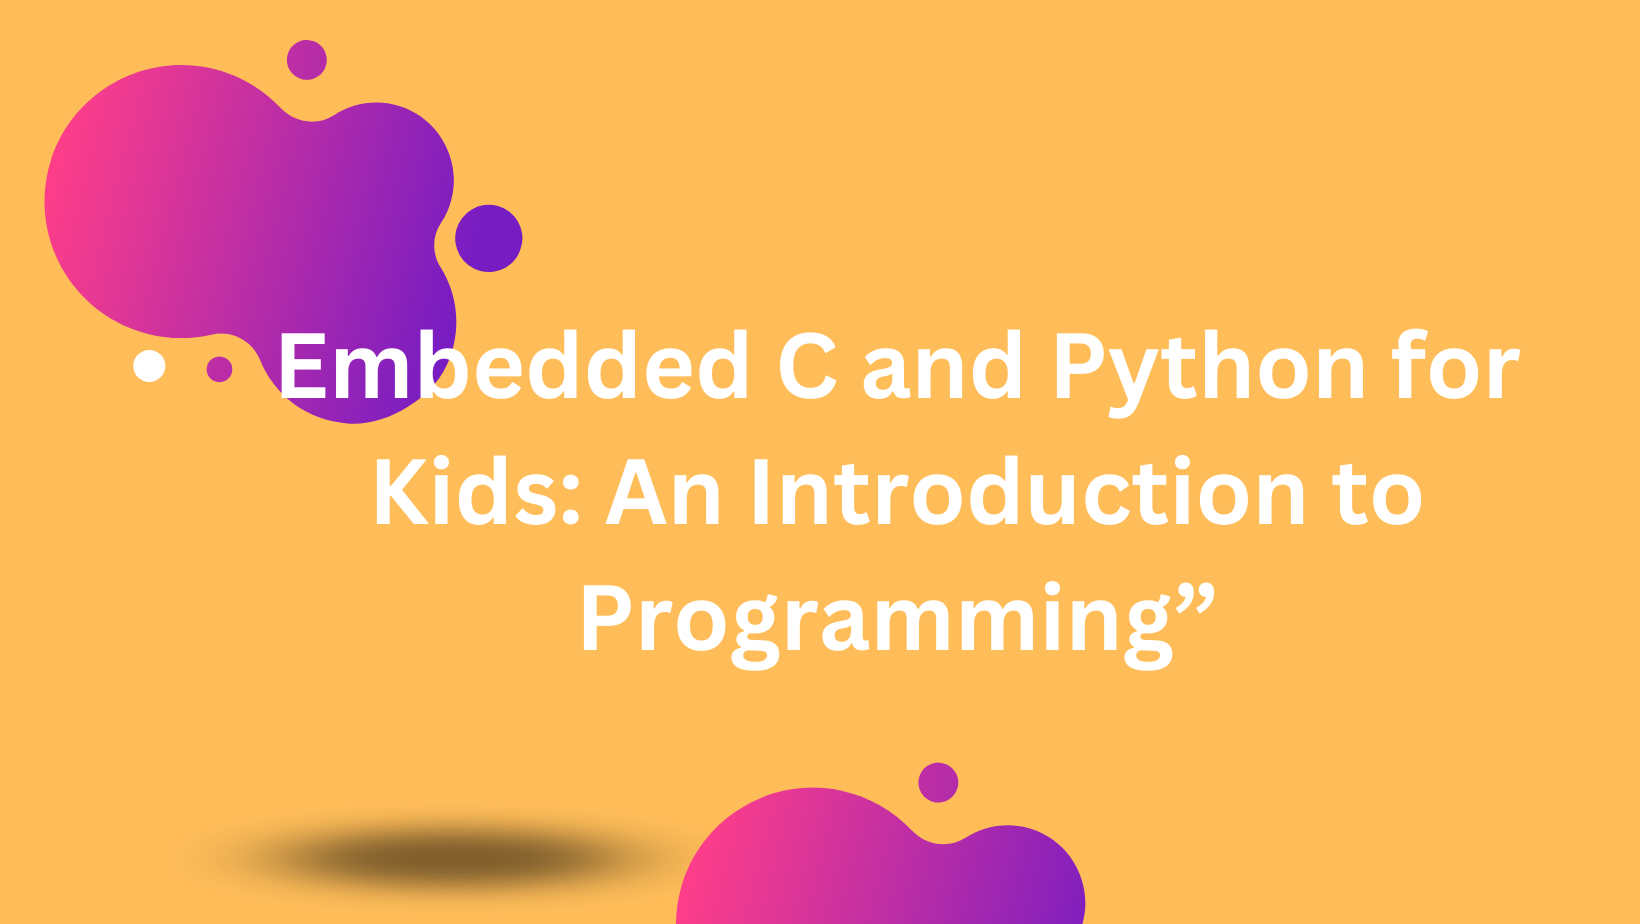 embedded c and python course for kids